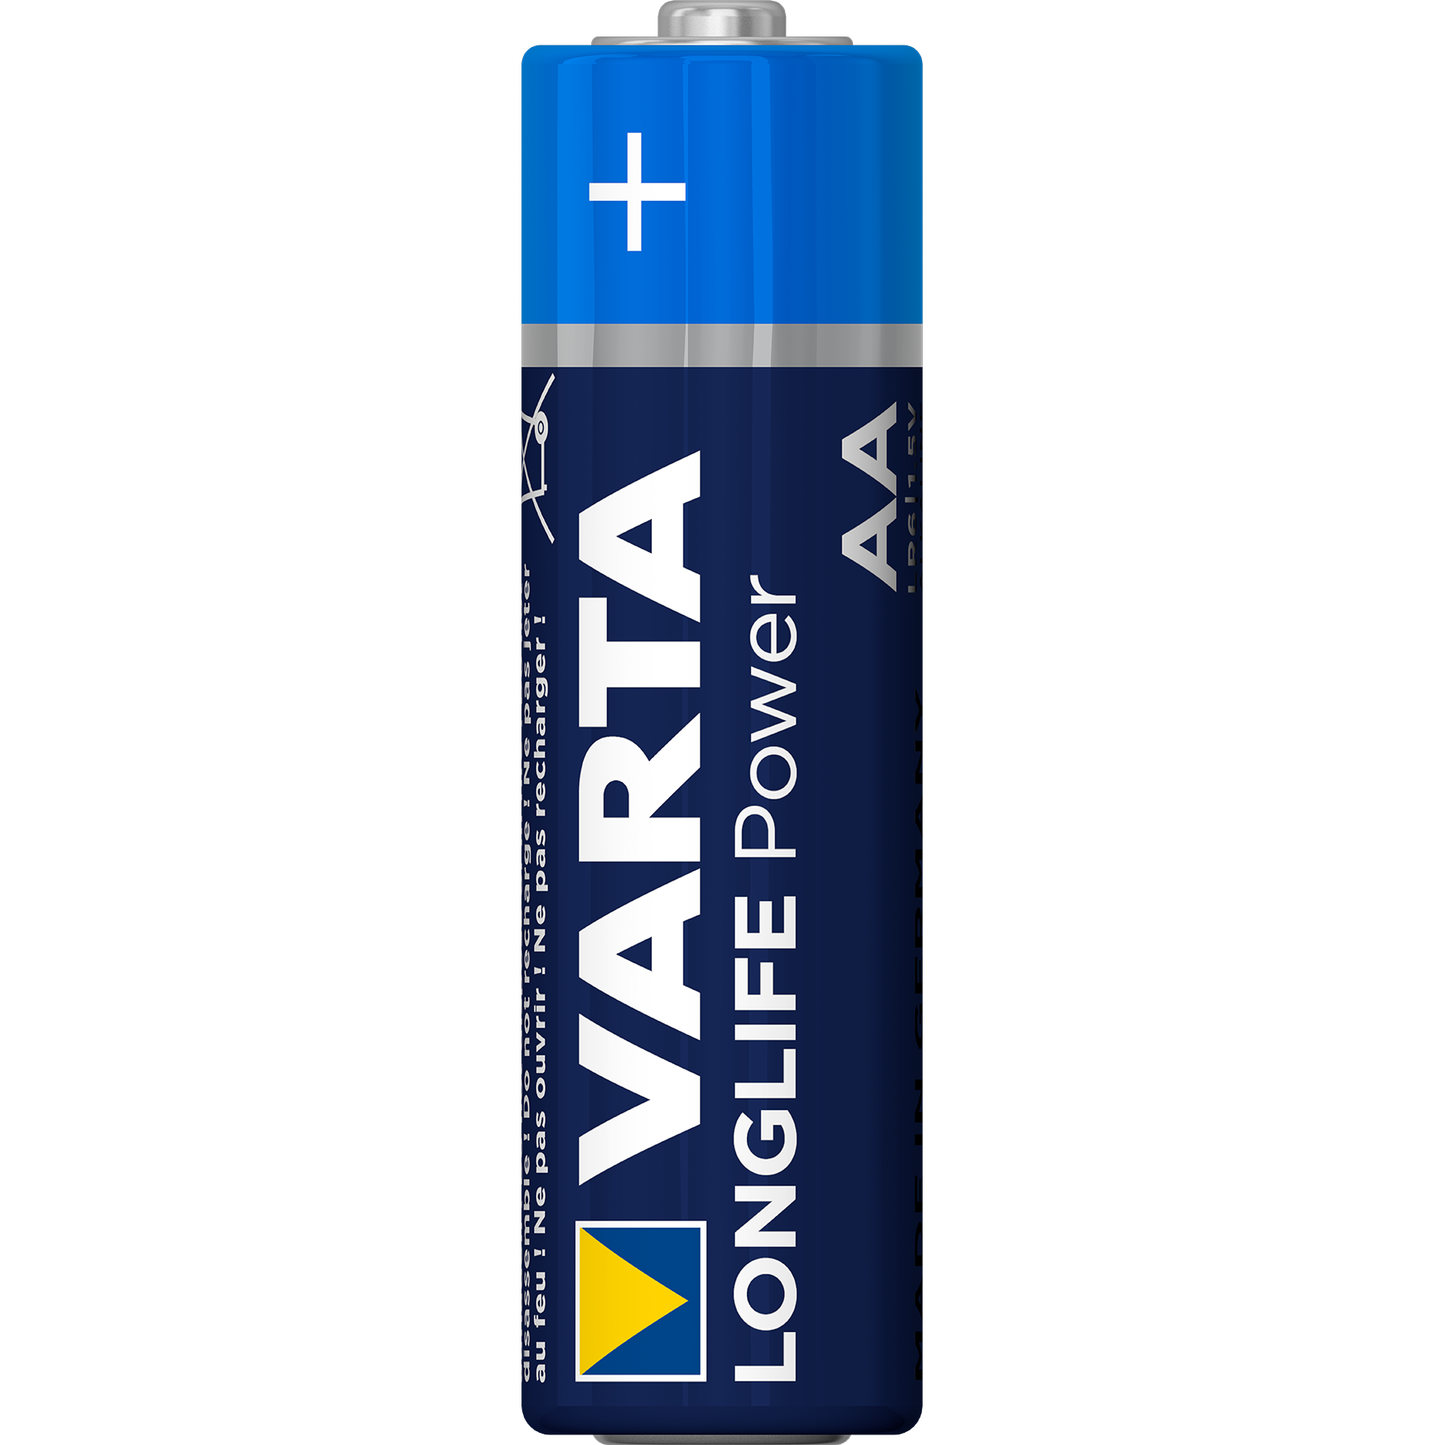 varta-longlife-power-aa-batteries-24pc-clear-value-pack